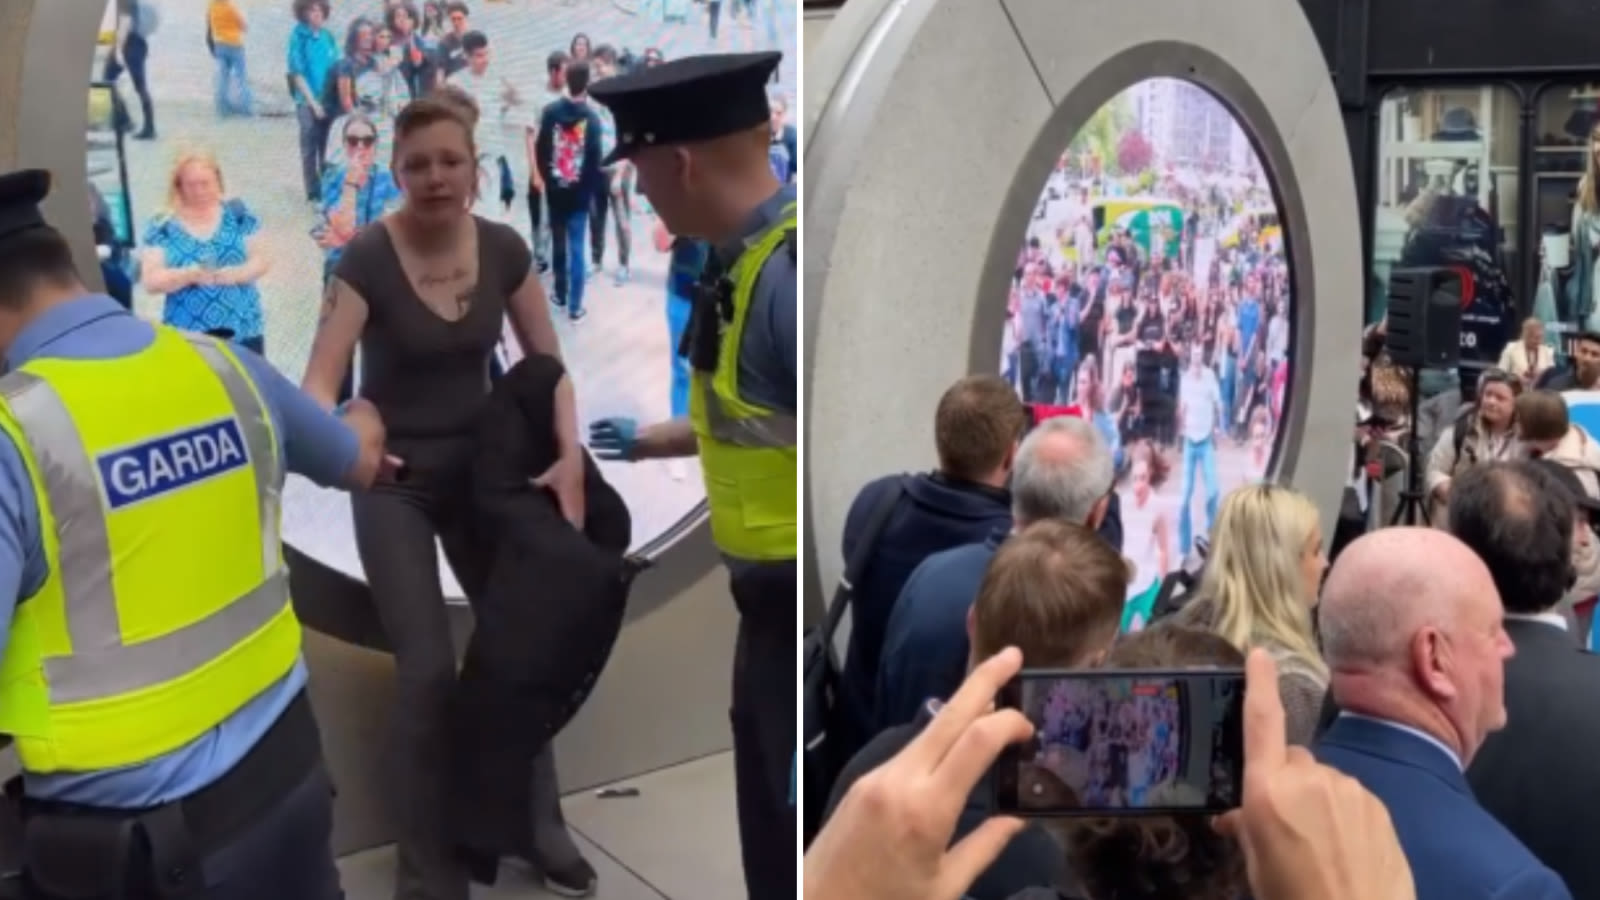 Dublin woman arrested mere hours after viral ‘portal’ to New York opens - Dexerto